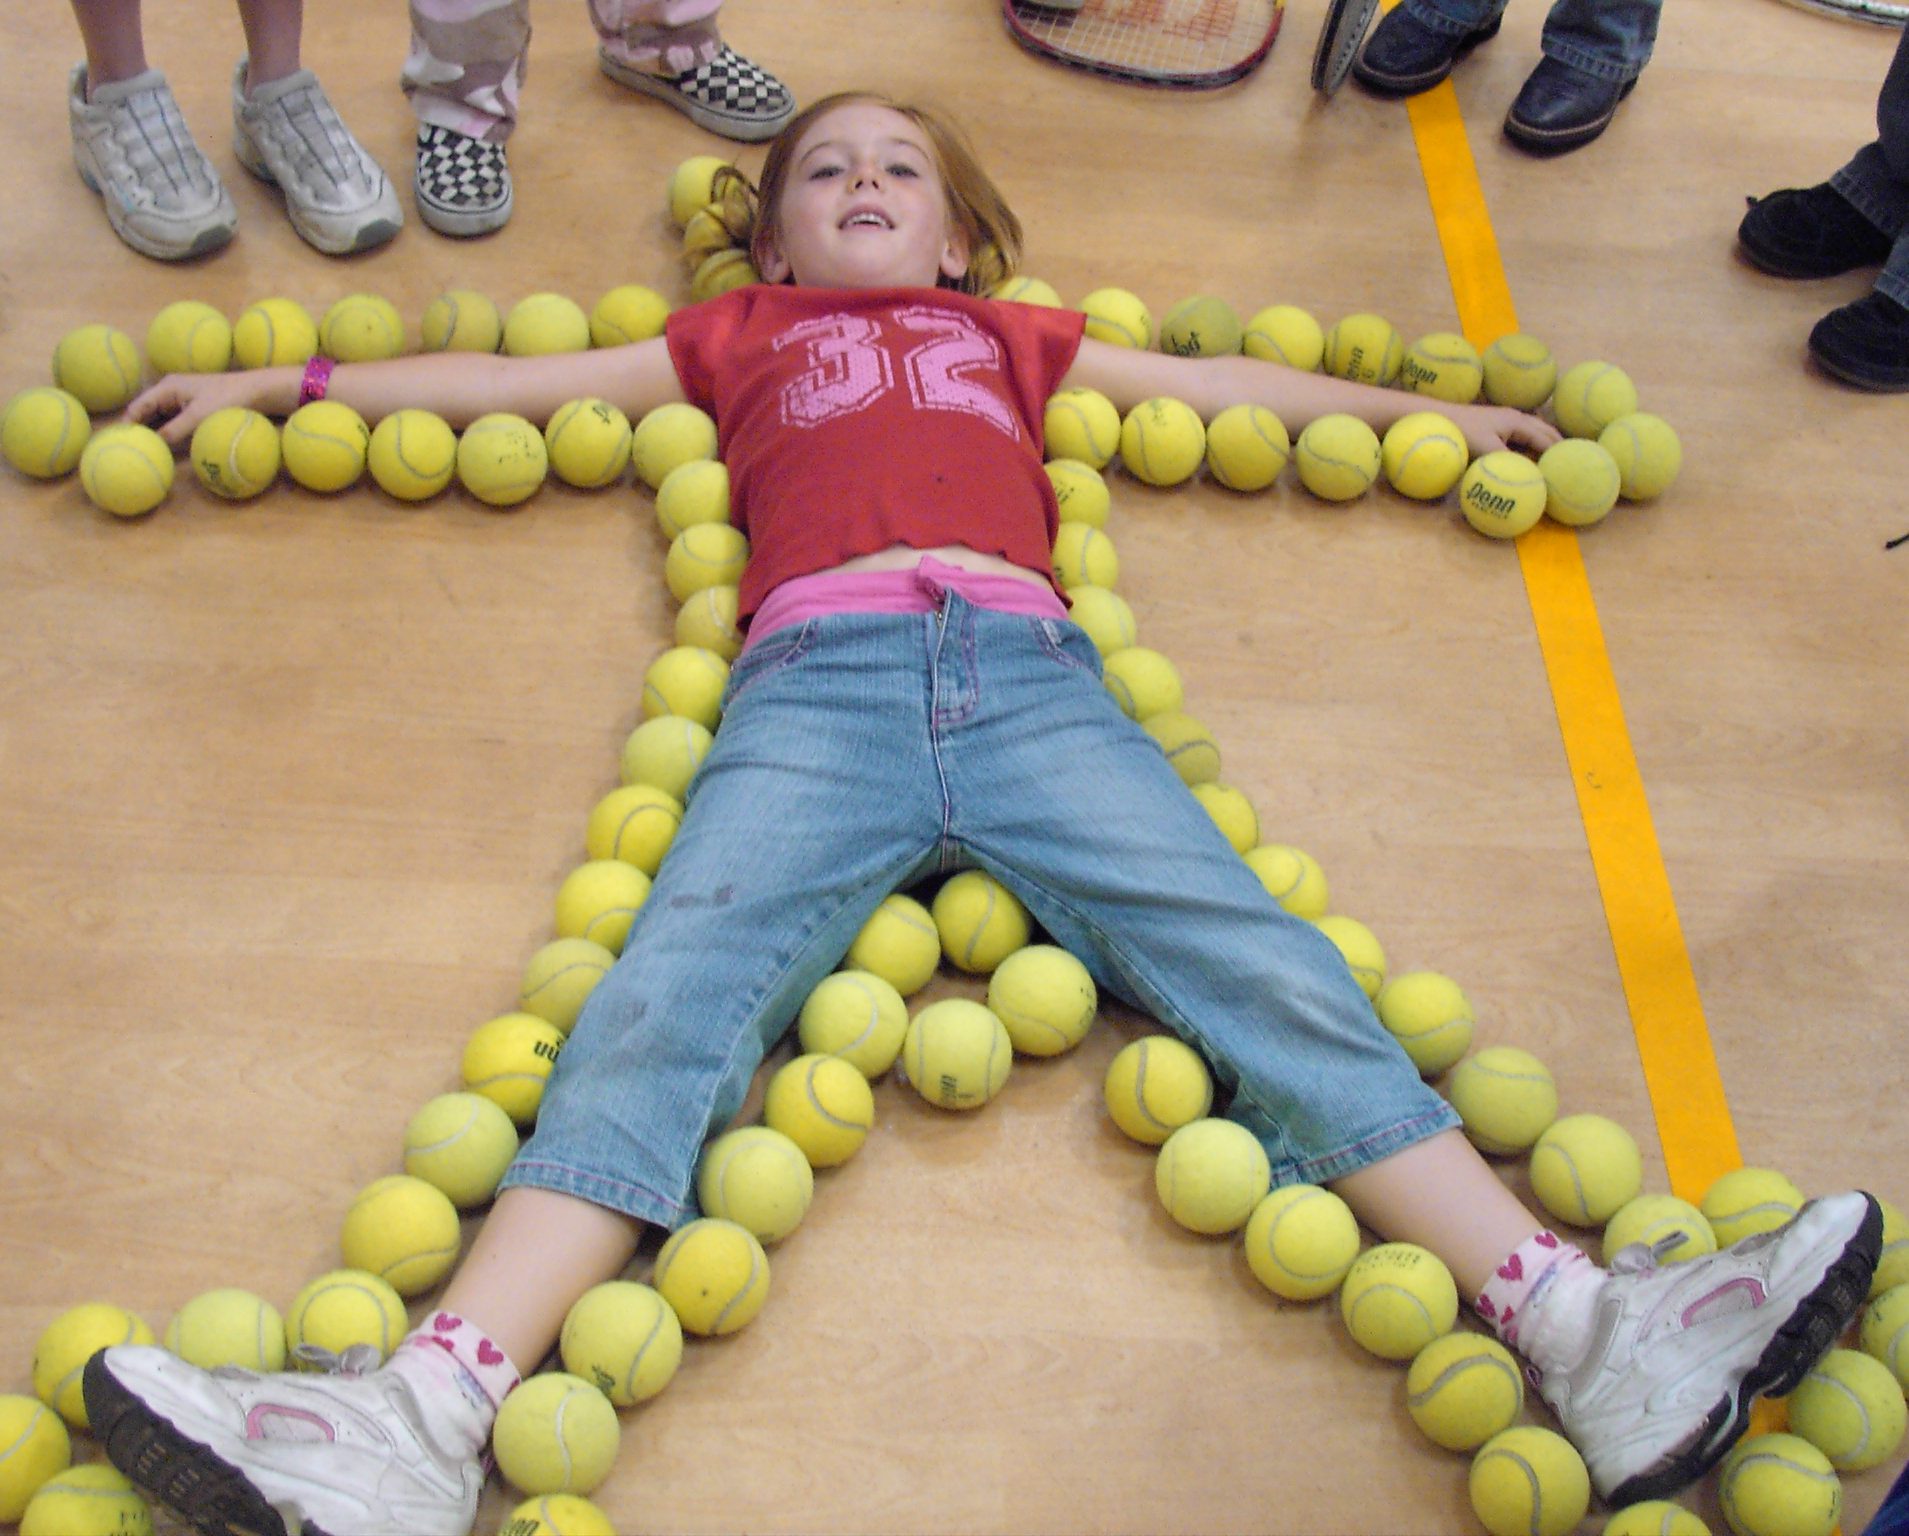 Girl lying flat with arms and legs spread out on floor outlined with tennis balls